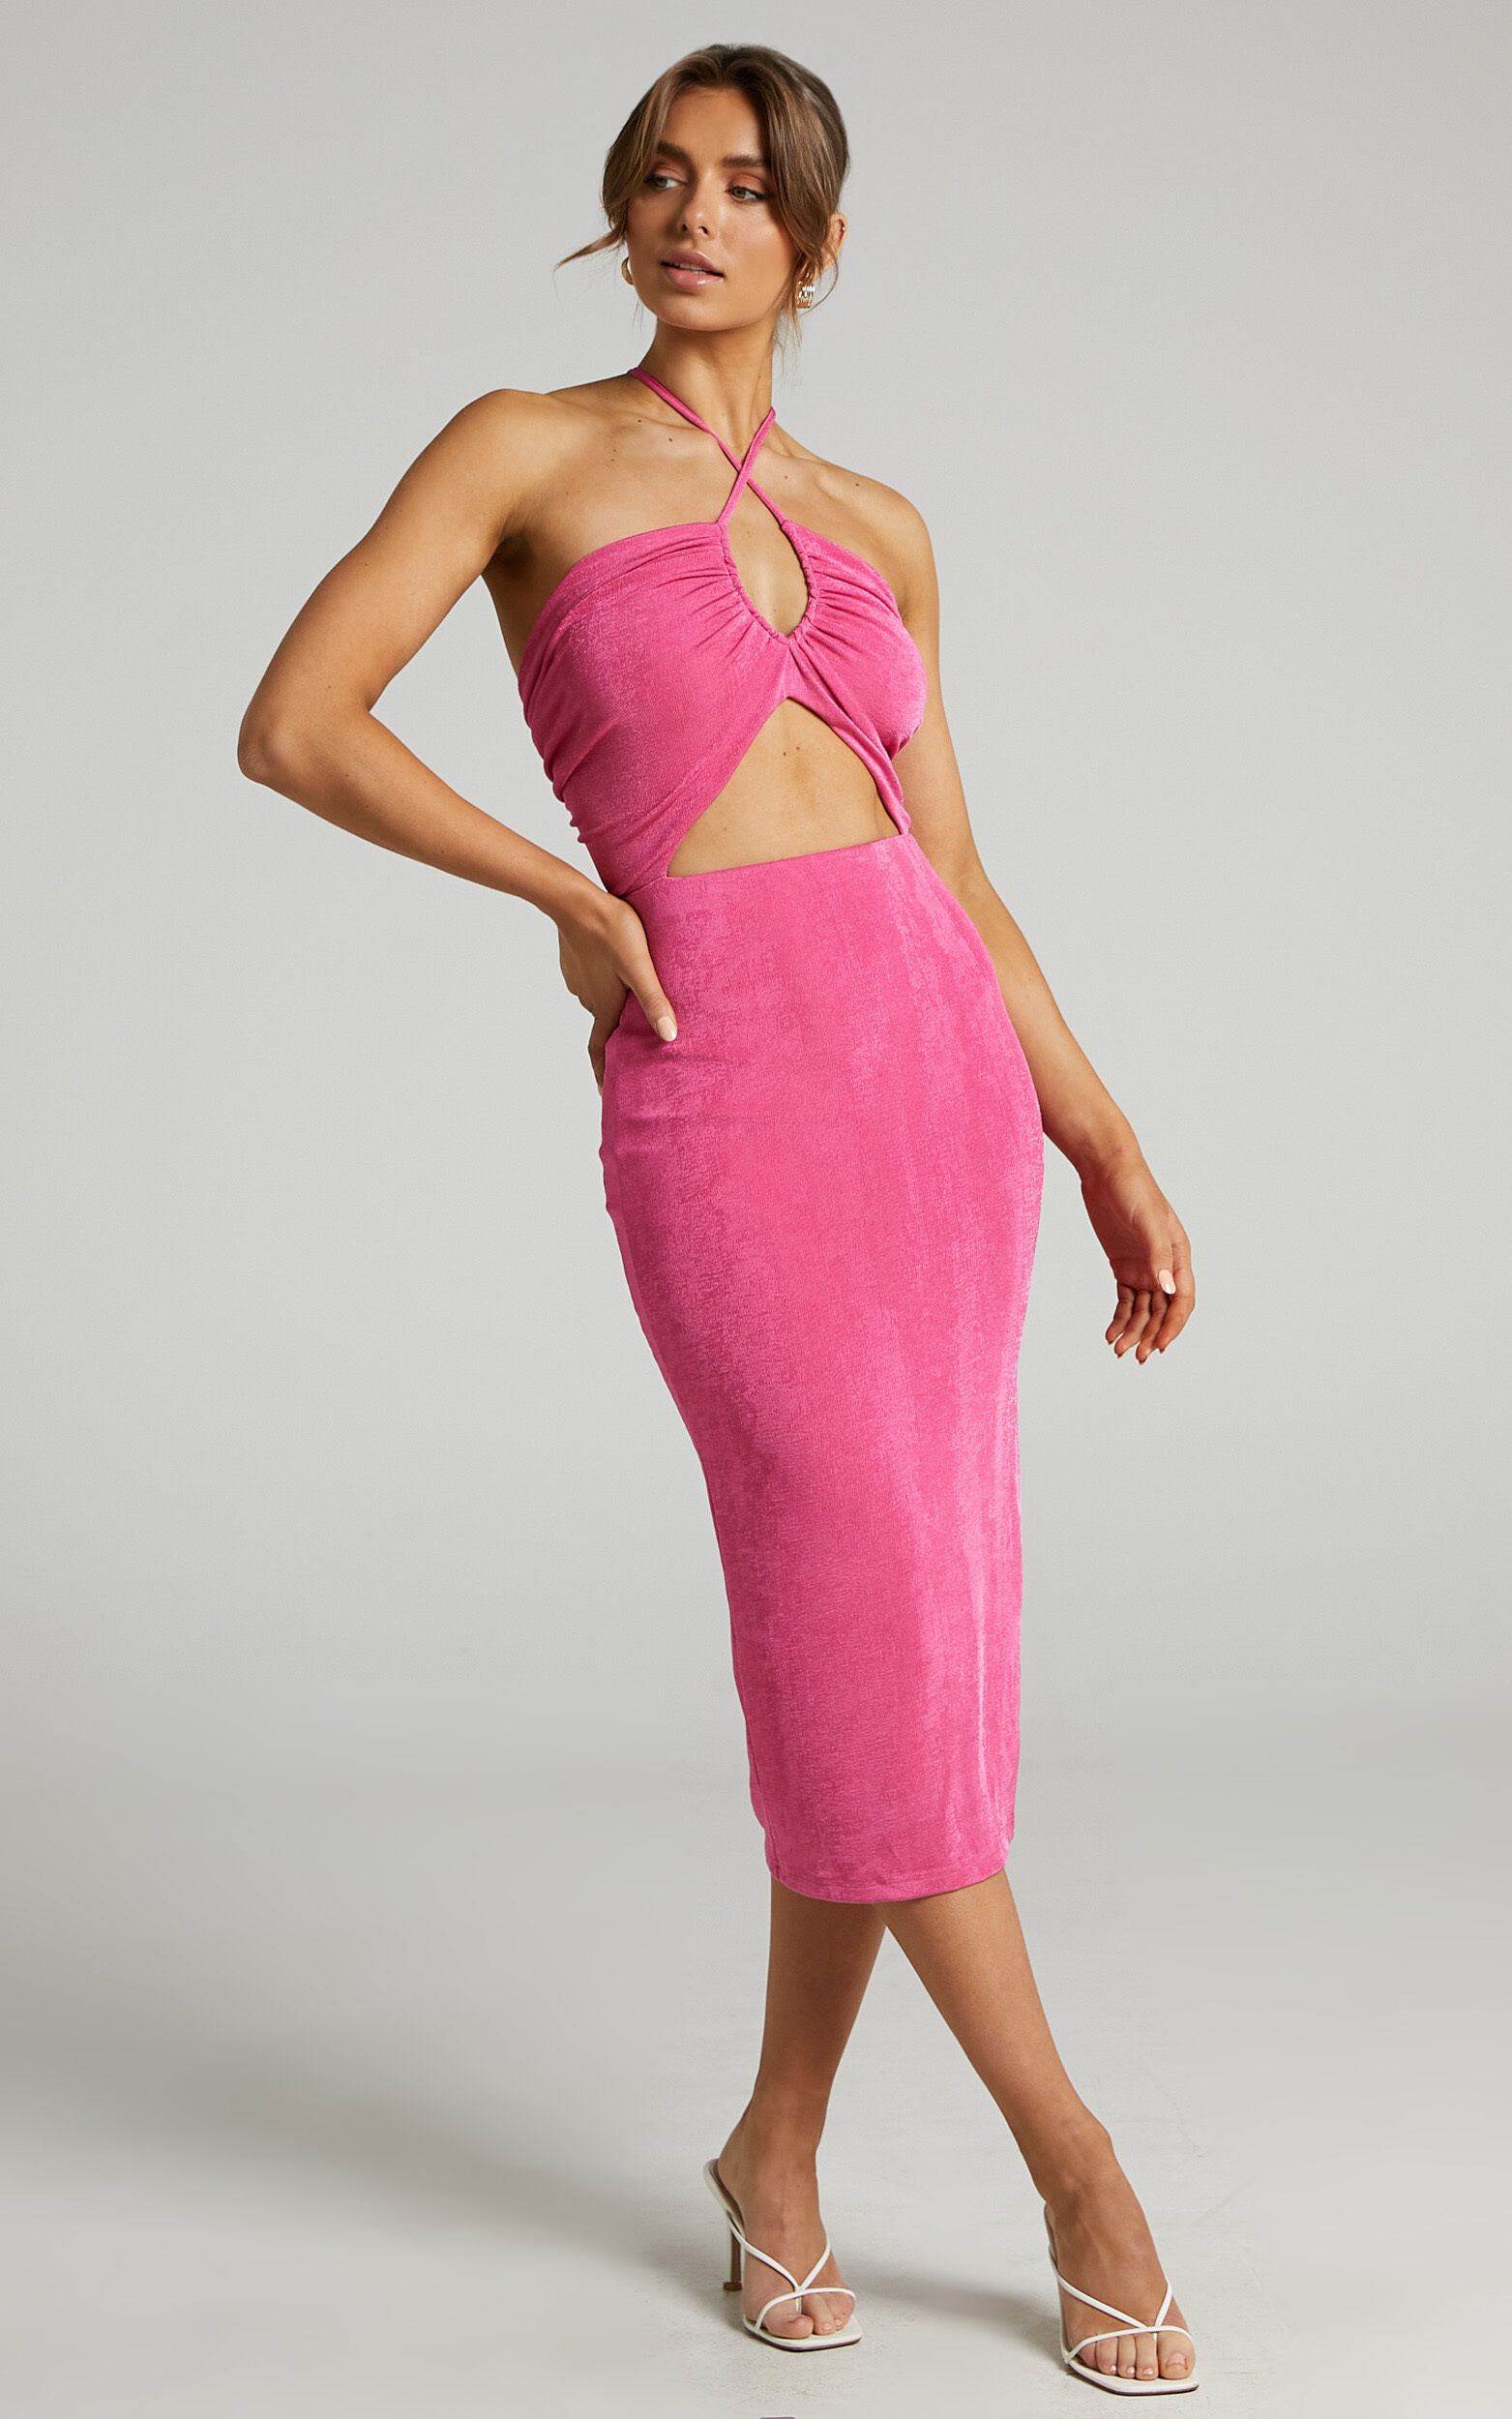 Bamba Cross Front Cut Out Midi Dress in Hot Pink - 06, PNK1, super-hi-res image number null